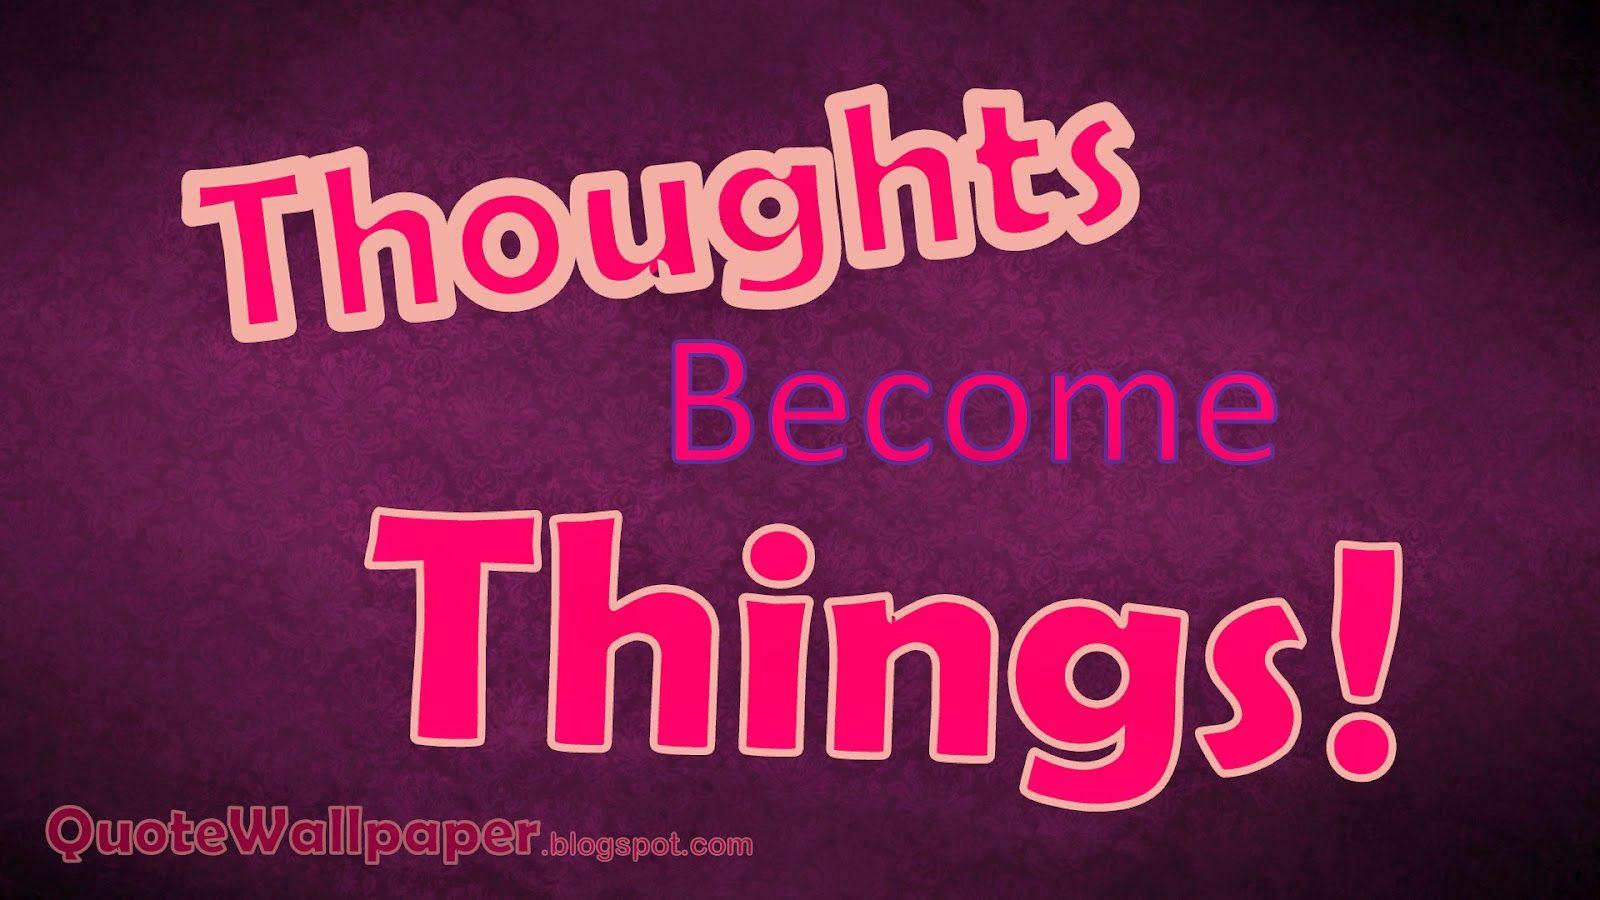 Quotes Wallpaper: Thoughts Become Things HD Wallpaper